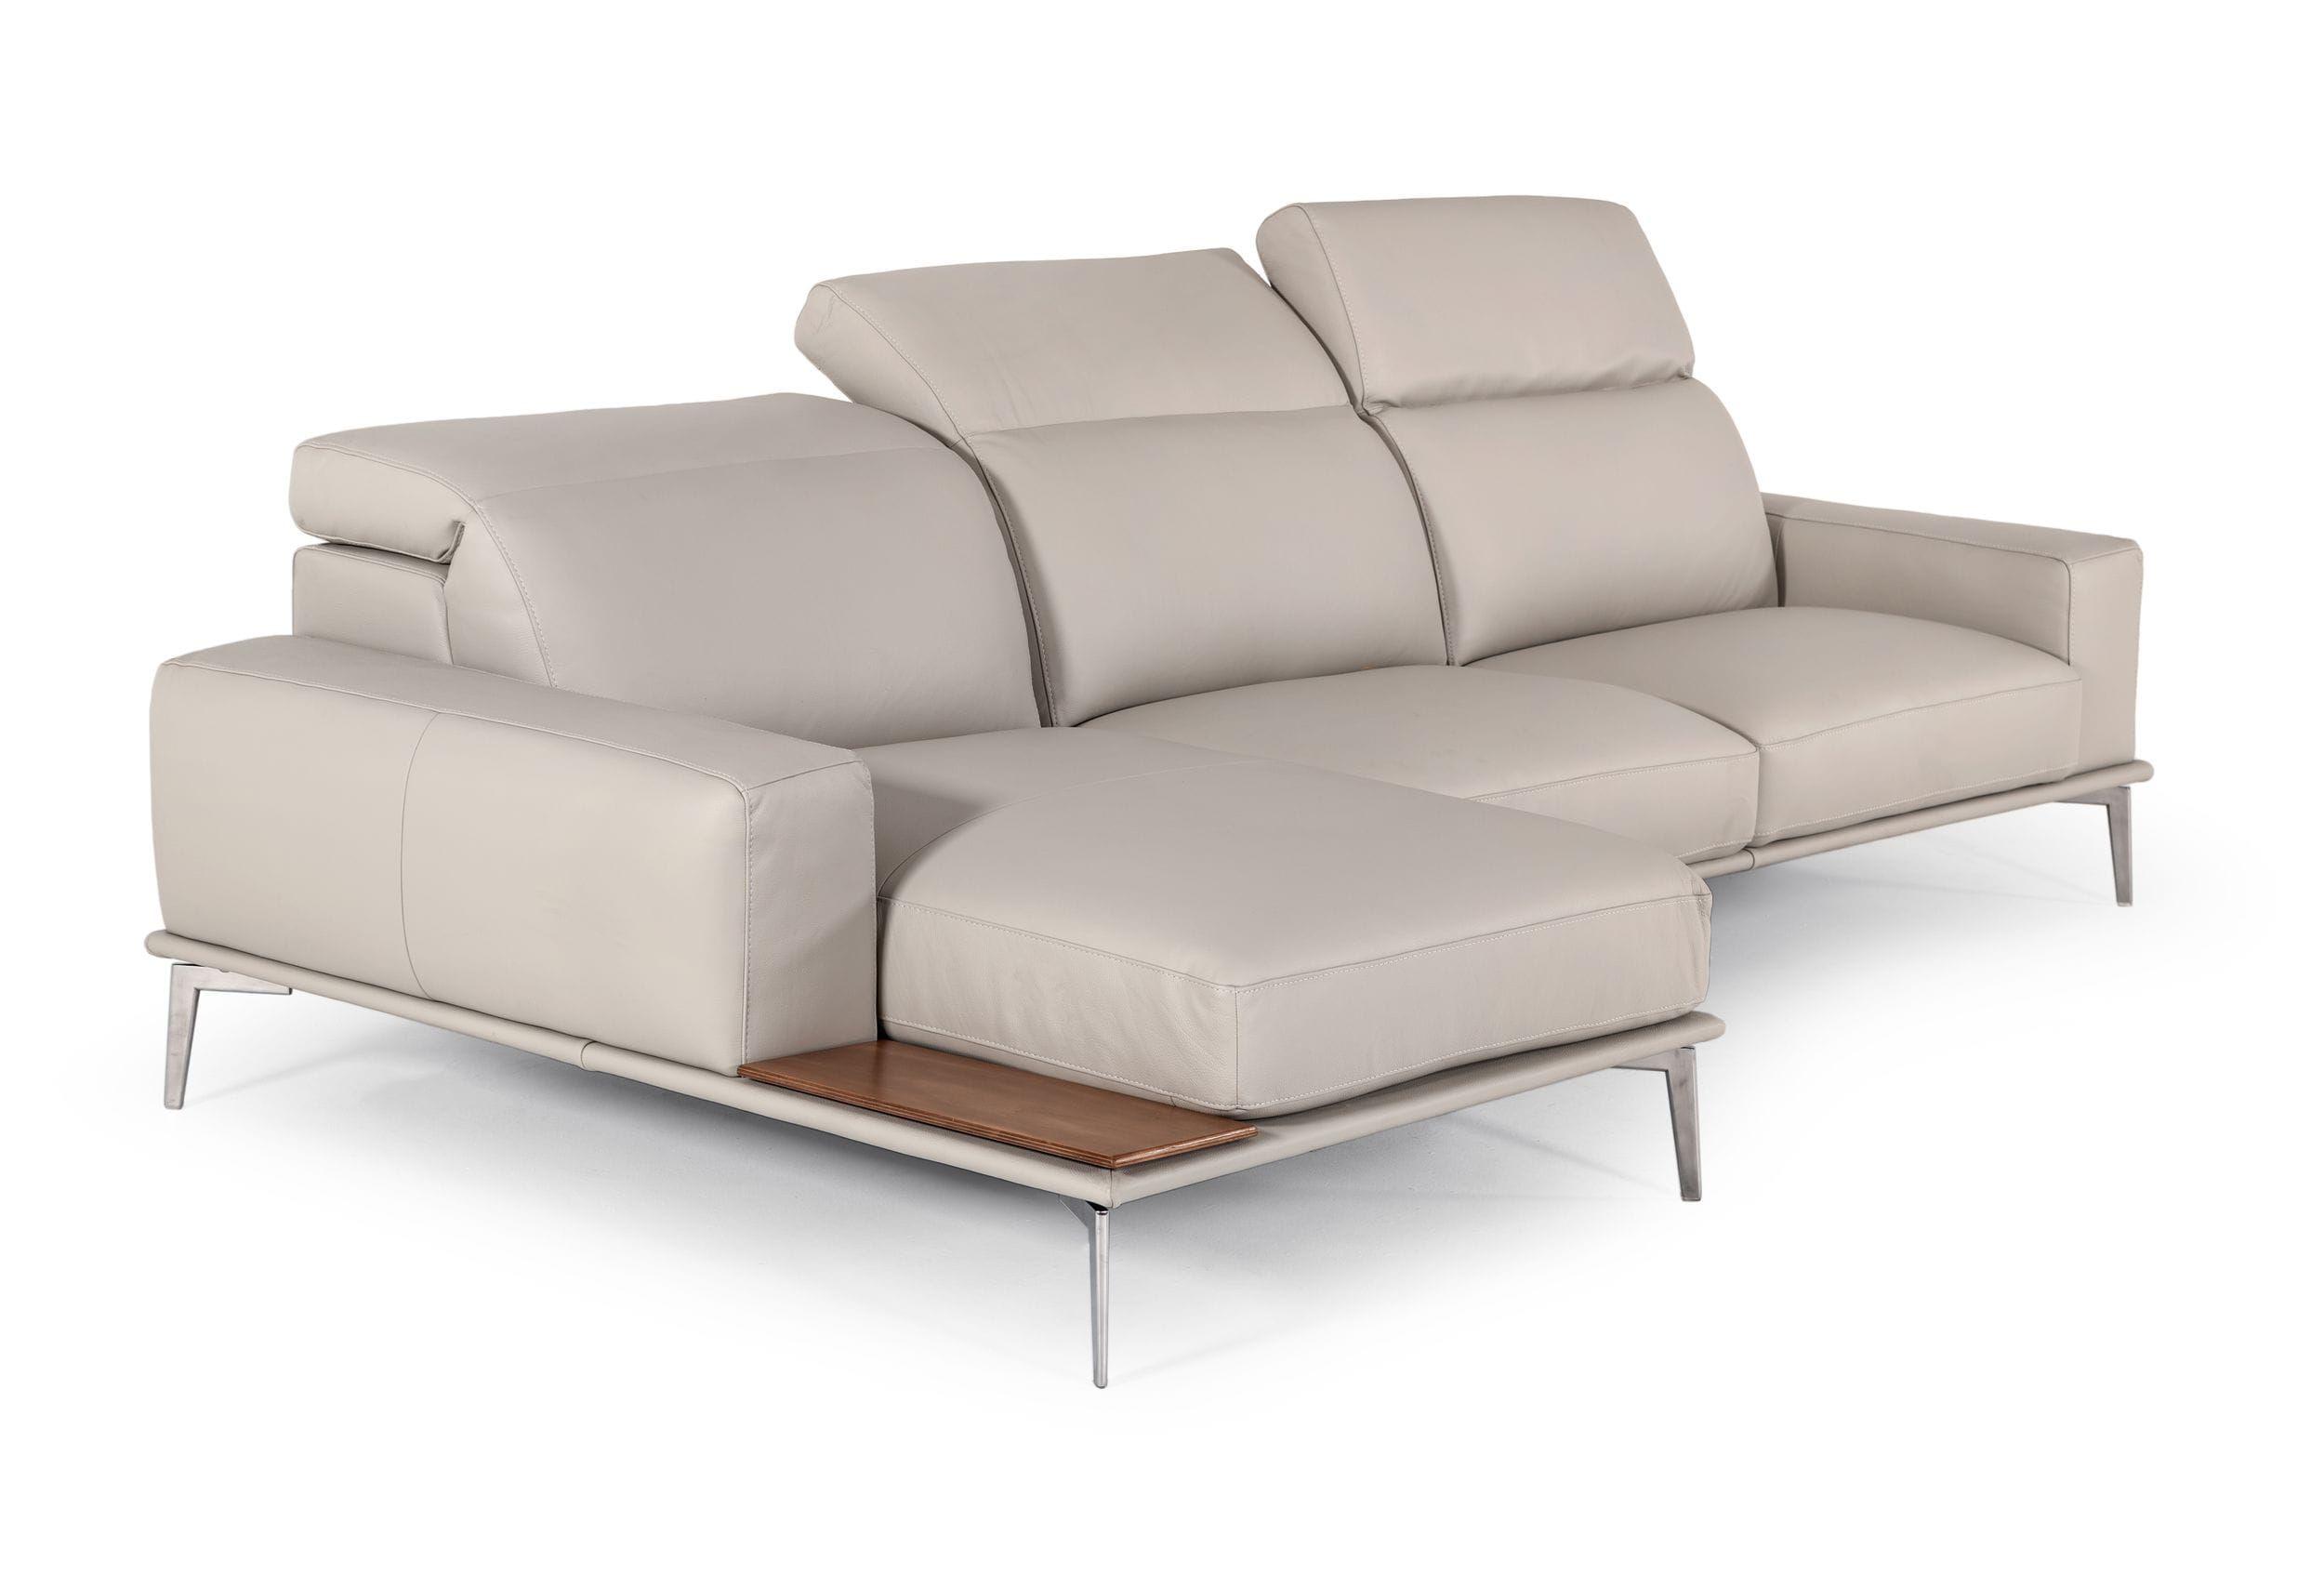 Contemporary, Modern Sectional Sofa VGNTVILLENEUVE-GRY-LAF-SECT VGNTVILLENEUVE-GRY-LAF-SECT in Gray Full Leather